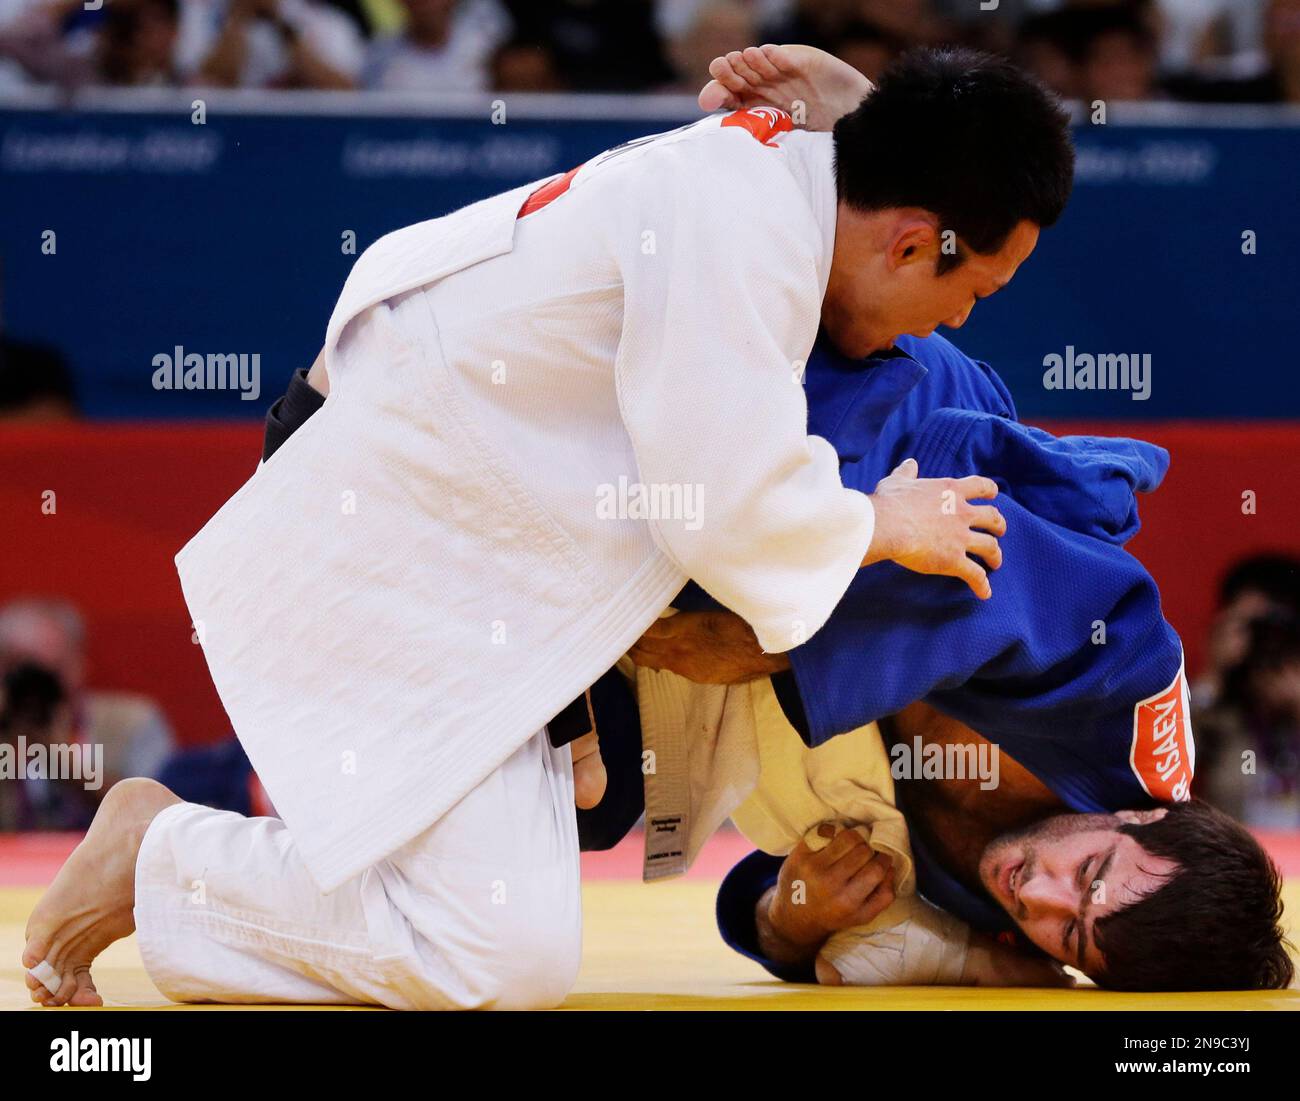 Wang Ki-Chun of South Korea, top, and Mansur Isaev of Russia, compete during the mens 73-kg judo competition at the 2012 Summer Olympics, Monday, July 30, 2012, in London